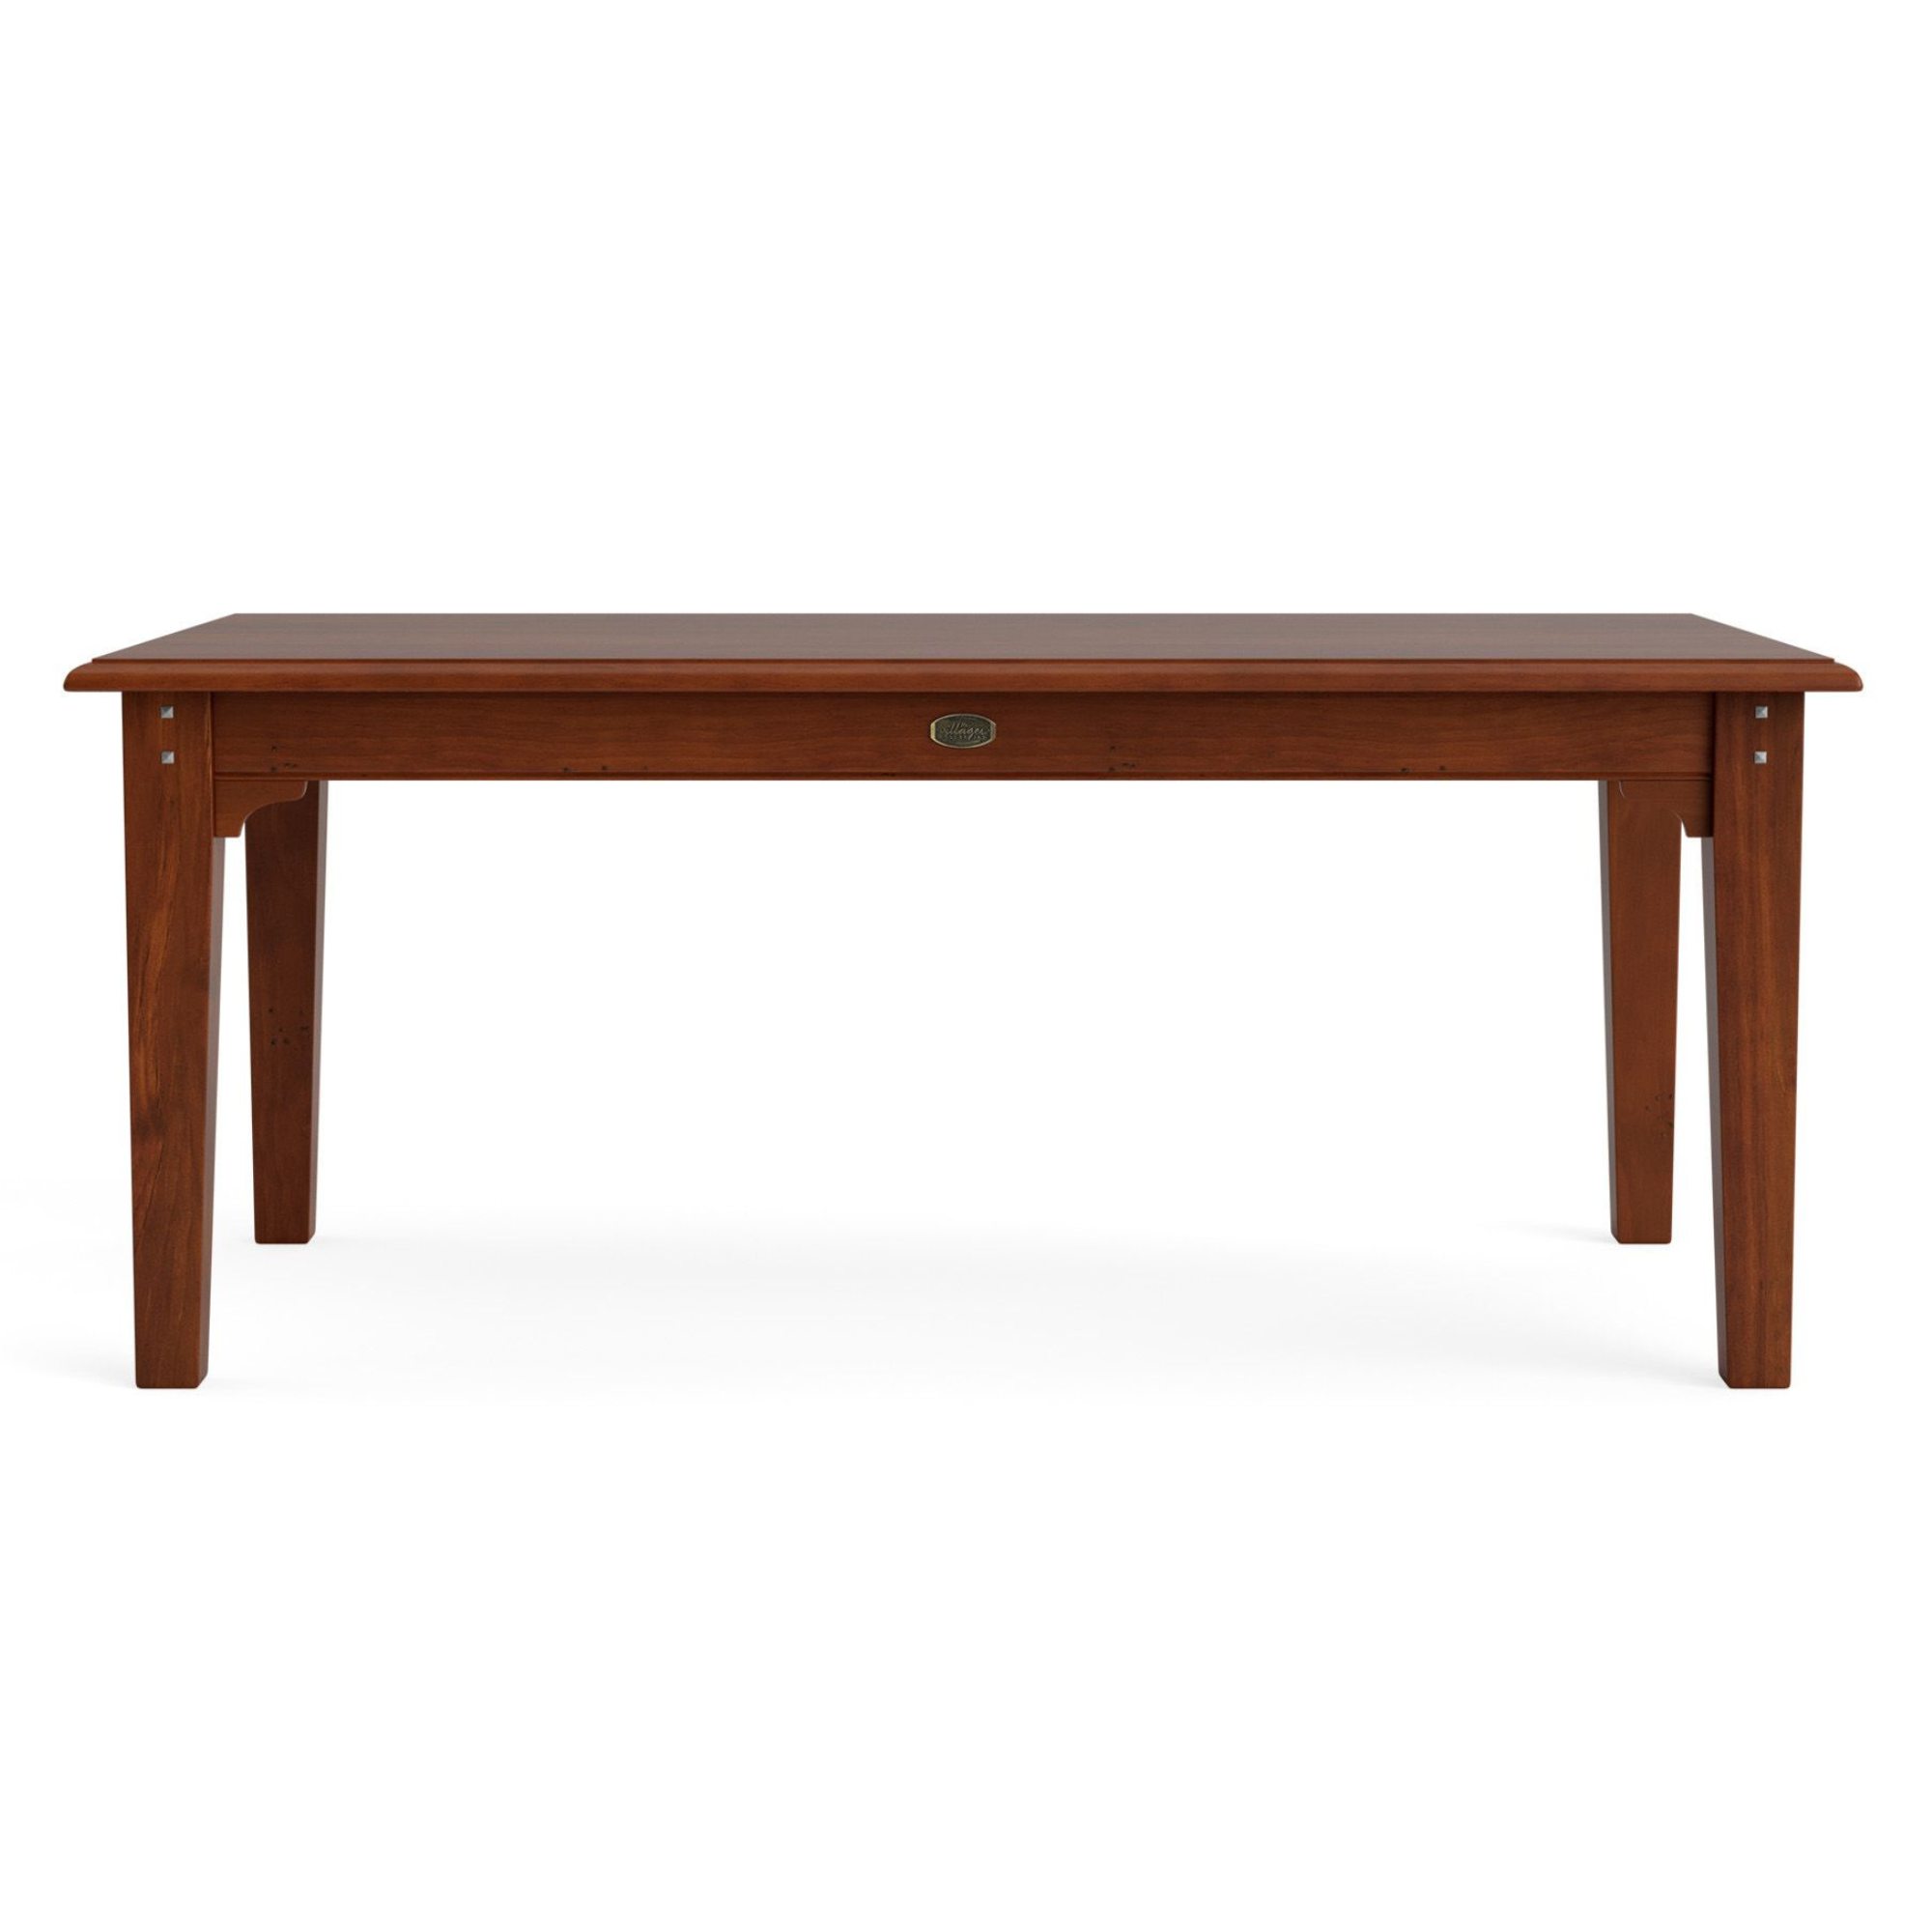 VILLAGER 1800 x 1050 DINING TABLE TABLE | NZ MADE